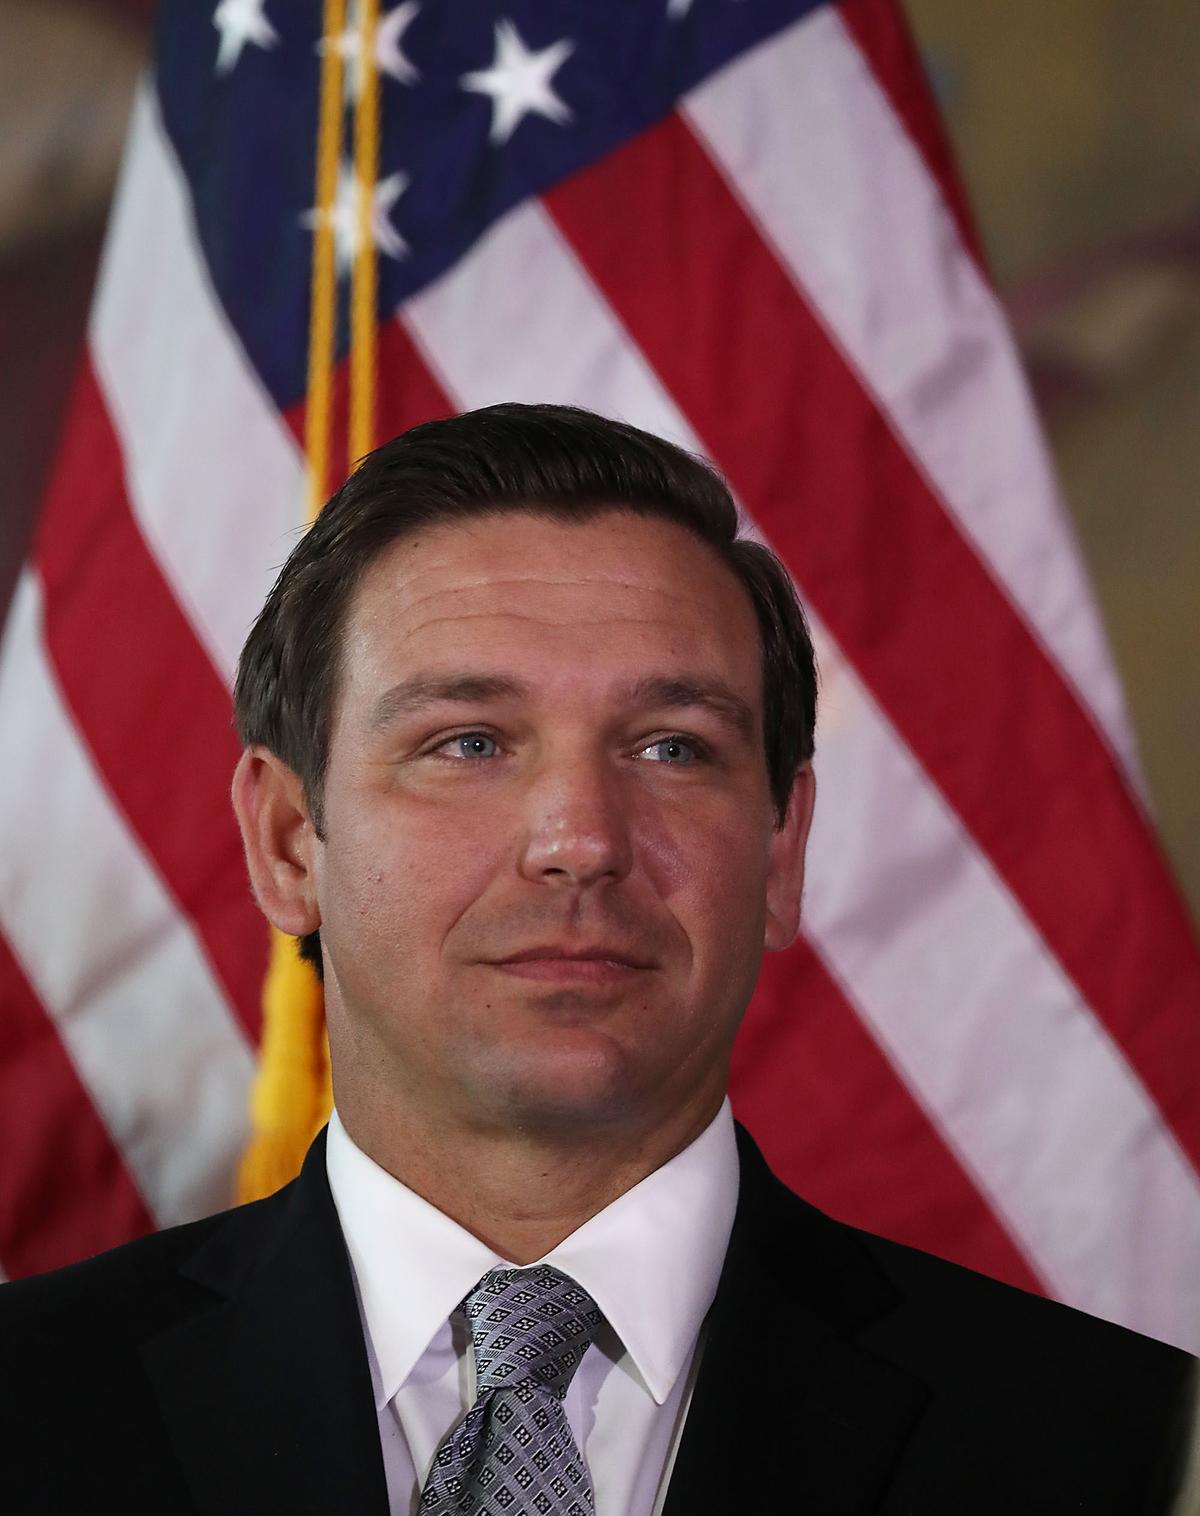 Gov. Ron DeSantis attends an event at the Freedom Tower, where he named Barbara Lagoa to the Florida Supreme Court on Jan. 9, 2019, in Miami, Florida. (Joe Raedle/Getty Images)